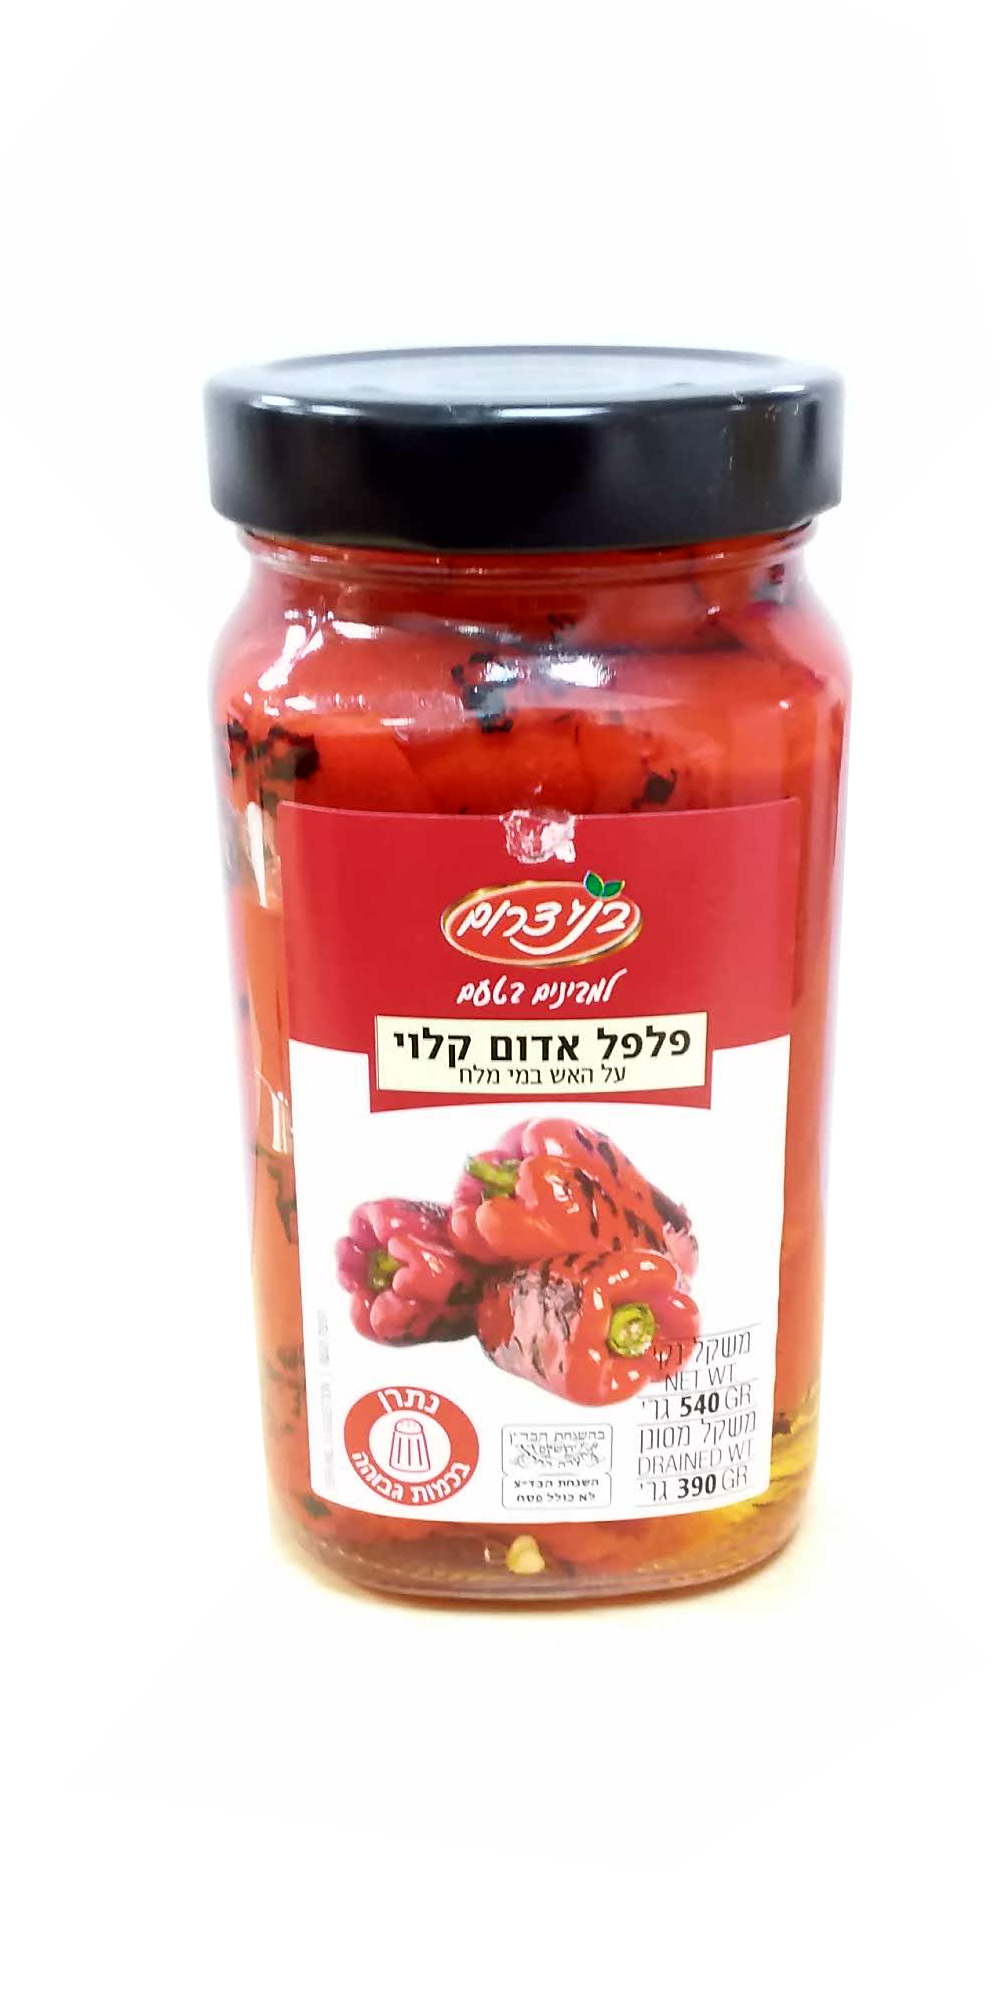 BNEI DAROM ROASTED RED PEPPERS IN JAR